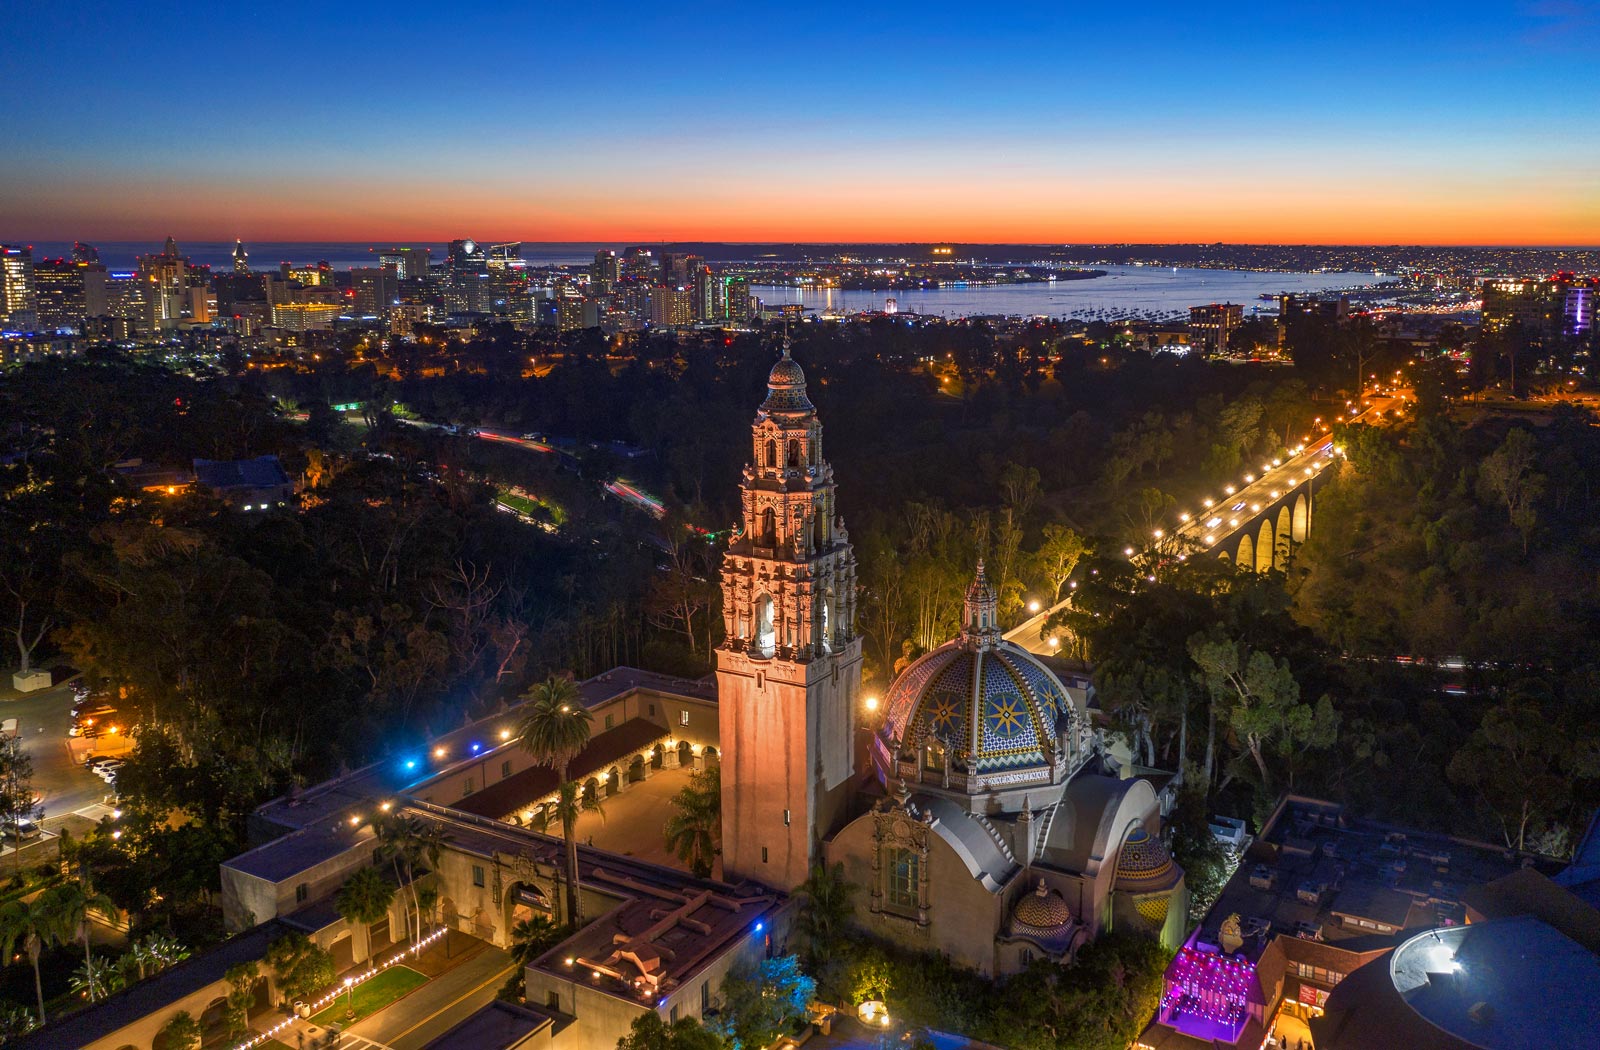 An Insider’s View on What to Do in February in Balboa Park